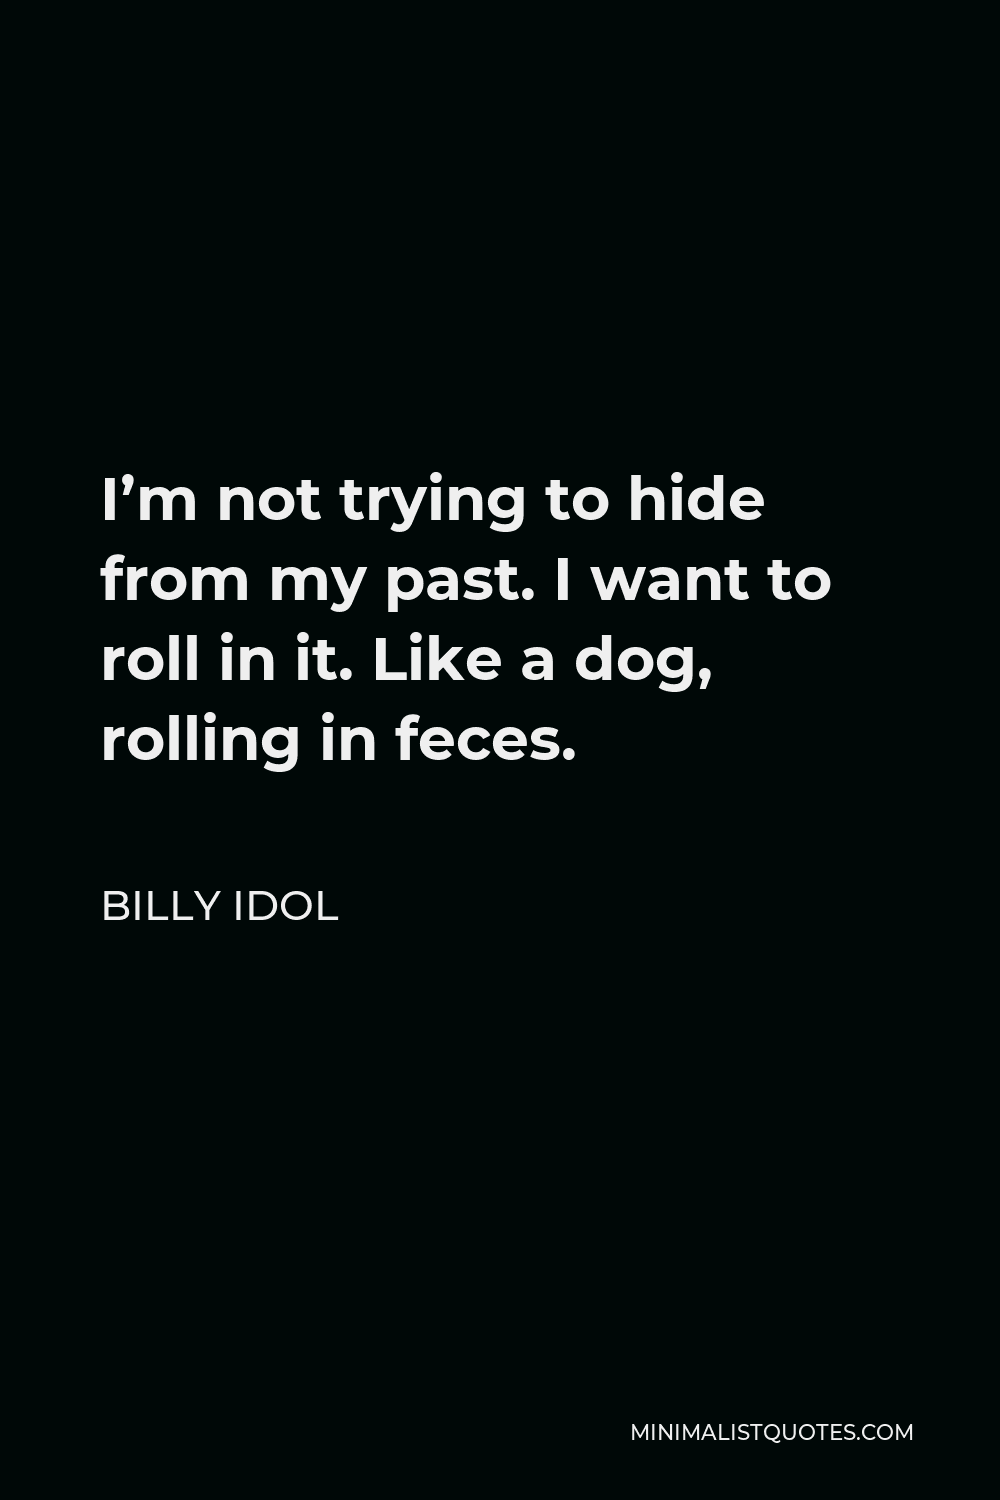 Billy Idol Quote - I’m not trying to hide from my past. I want to roll in it. Like a dog, rolling in feces.